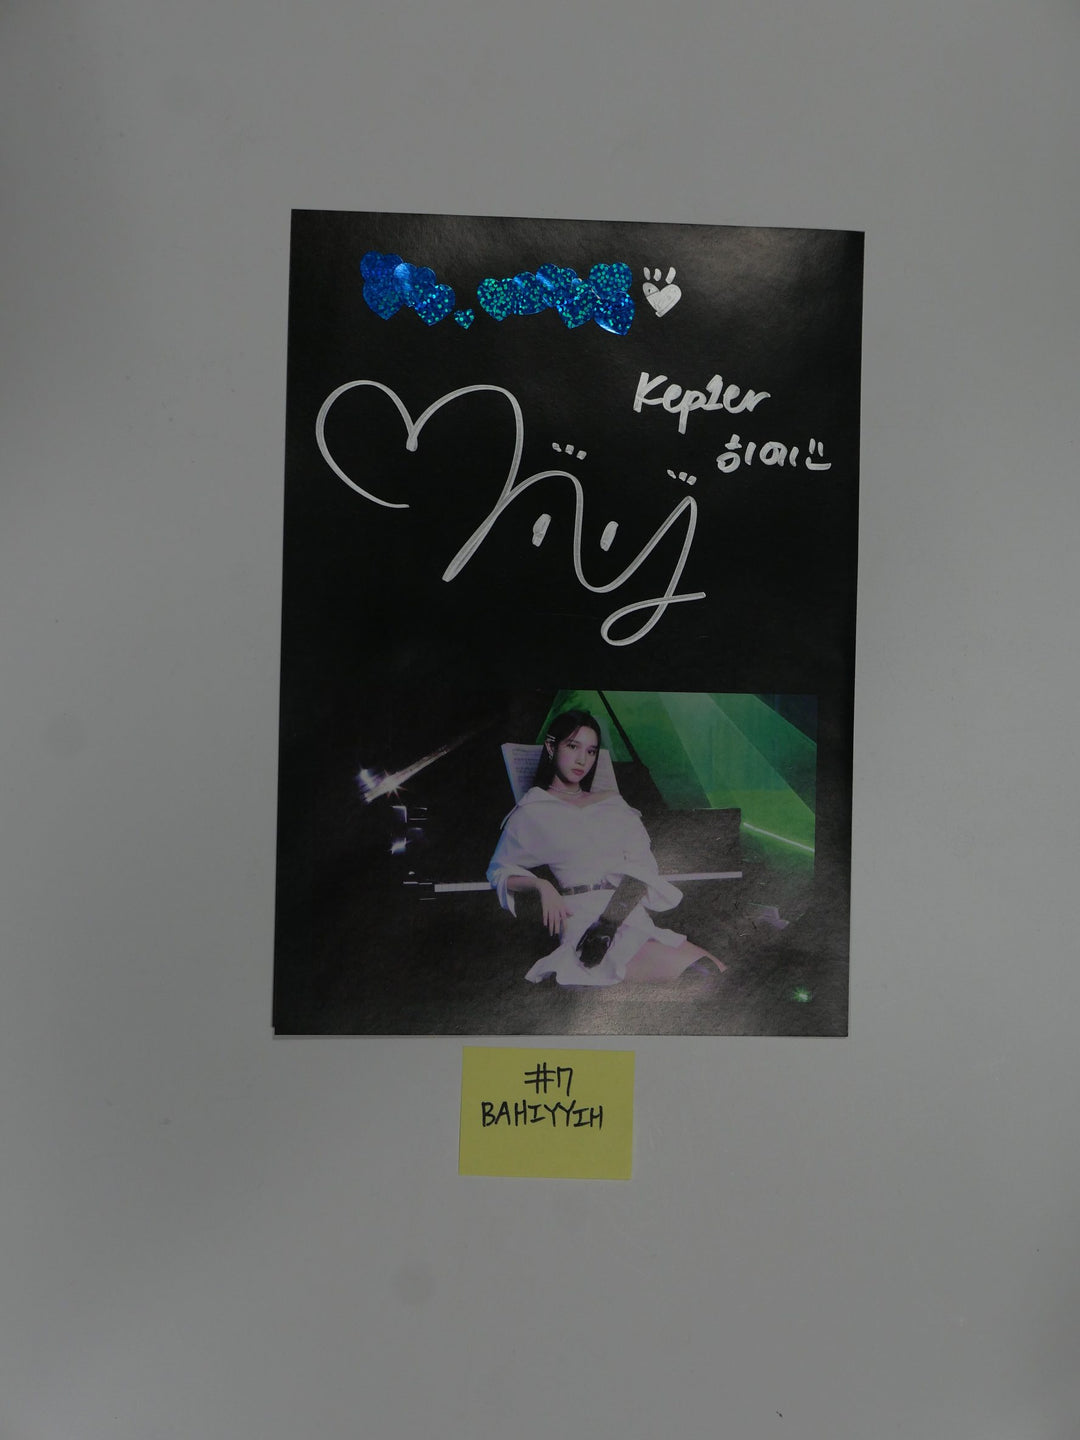 Kep1er "First Impact" 1st - A Cut Page From Fansign Event Album [BAHIYYIH, YOUNGEUN, YESEO]